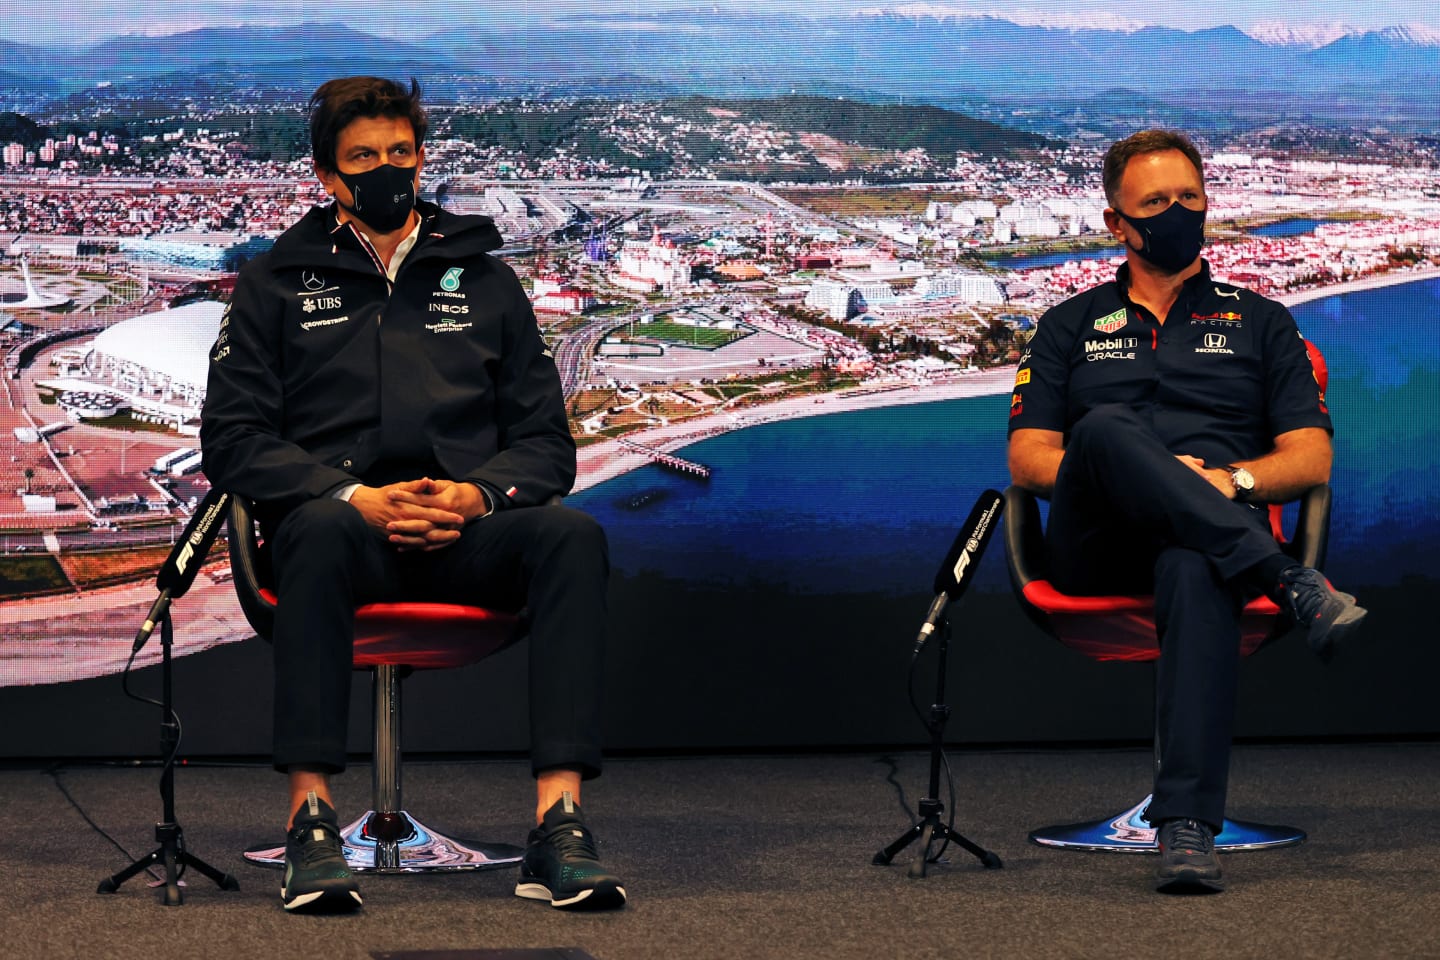 SOCHI, RUSSIA - SEPTEMBER 24: Mercedes GP Executive Director Toto Wolff and Red Bull Racing Team Principal Christian Horner talk in the Team Principals Press Conference during practice ahead of the F1 Grand Prix of Russia at Sochi Autodrom on September 24, 2021 in Sochi, Russia. (Photo by XPB - Pool/Getty Images)